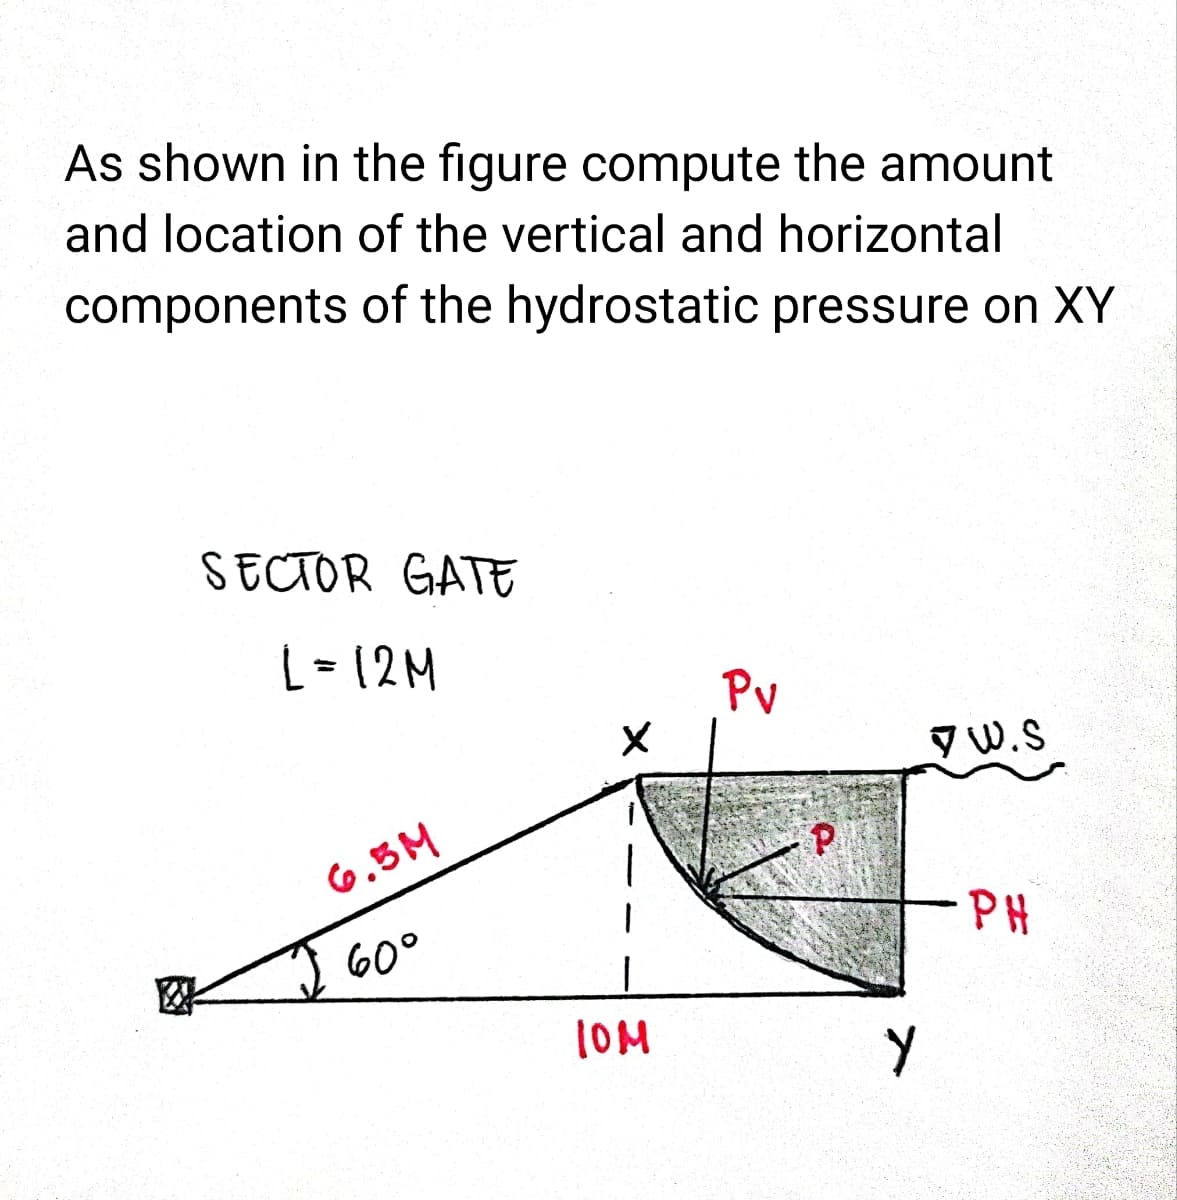 As shown in the figure compute the amount
and location of the vertical and horizontal
components
of the hydrostatic pressure on XY
SECTOR GATE
L=12M
6.5M
I 60°
10M
Pv
P
Y
W.S
PH